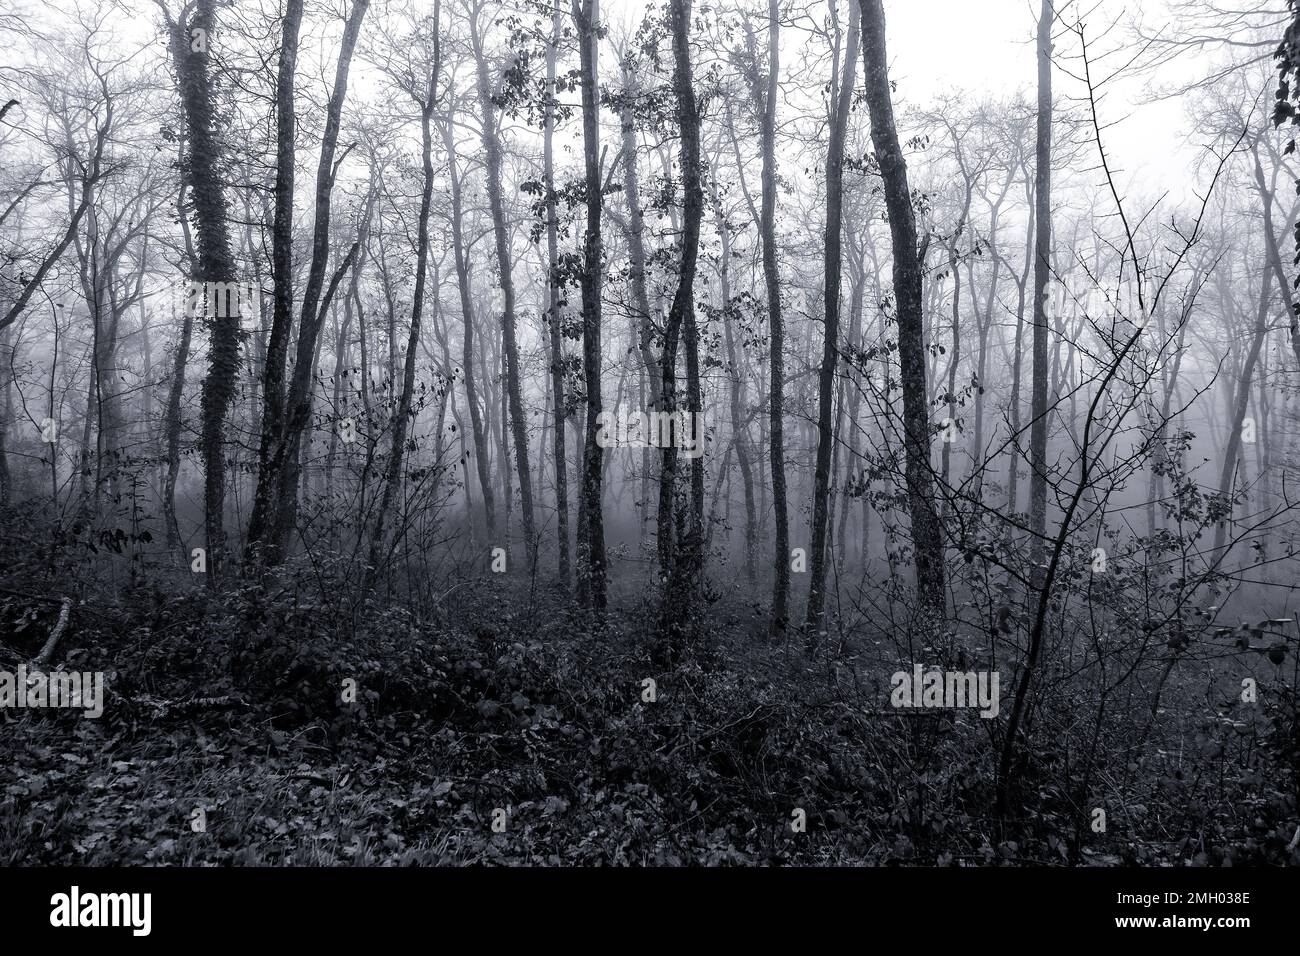 Detail of dark and gloomy forest in nature, fear and terror Stock Photo